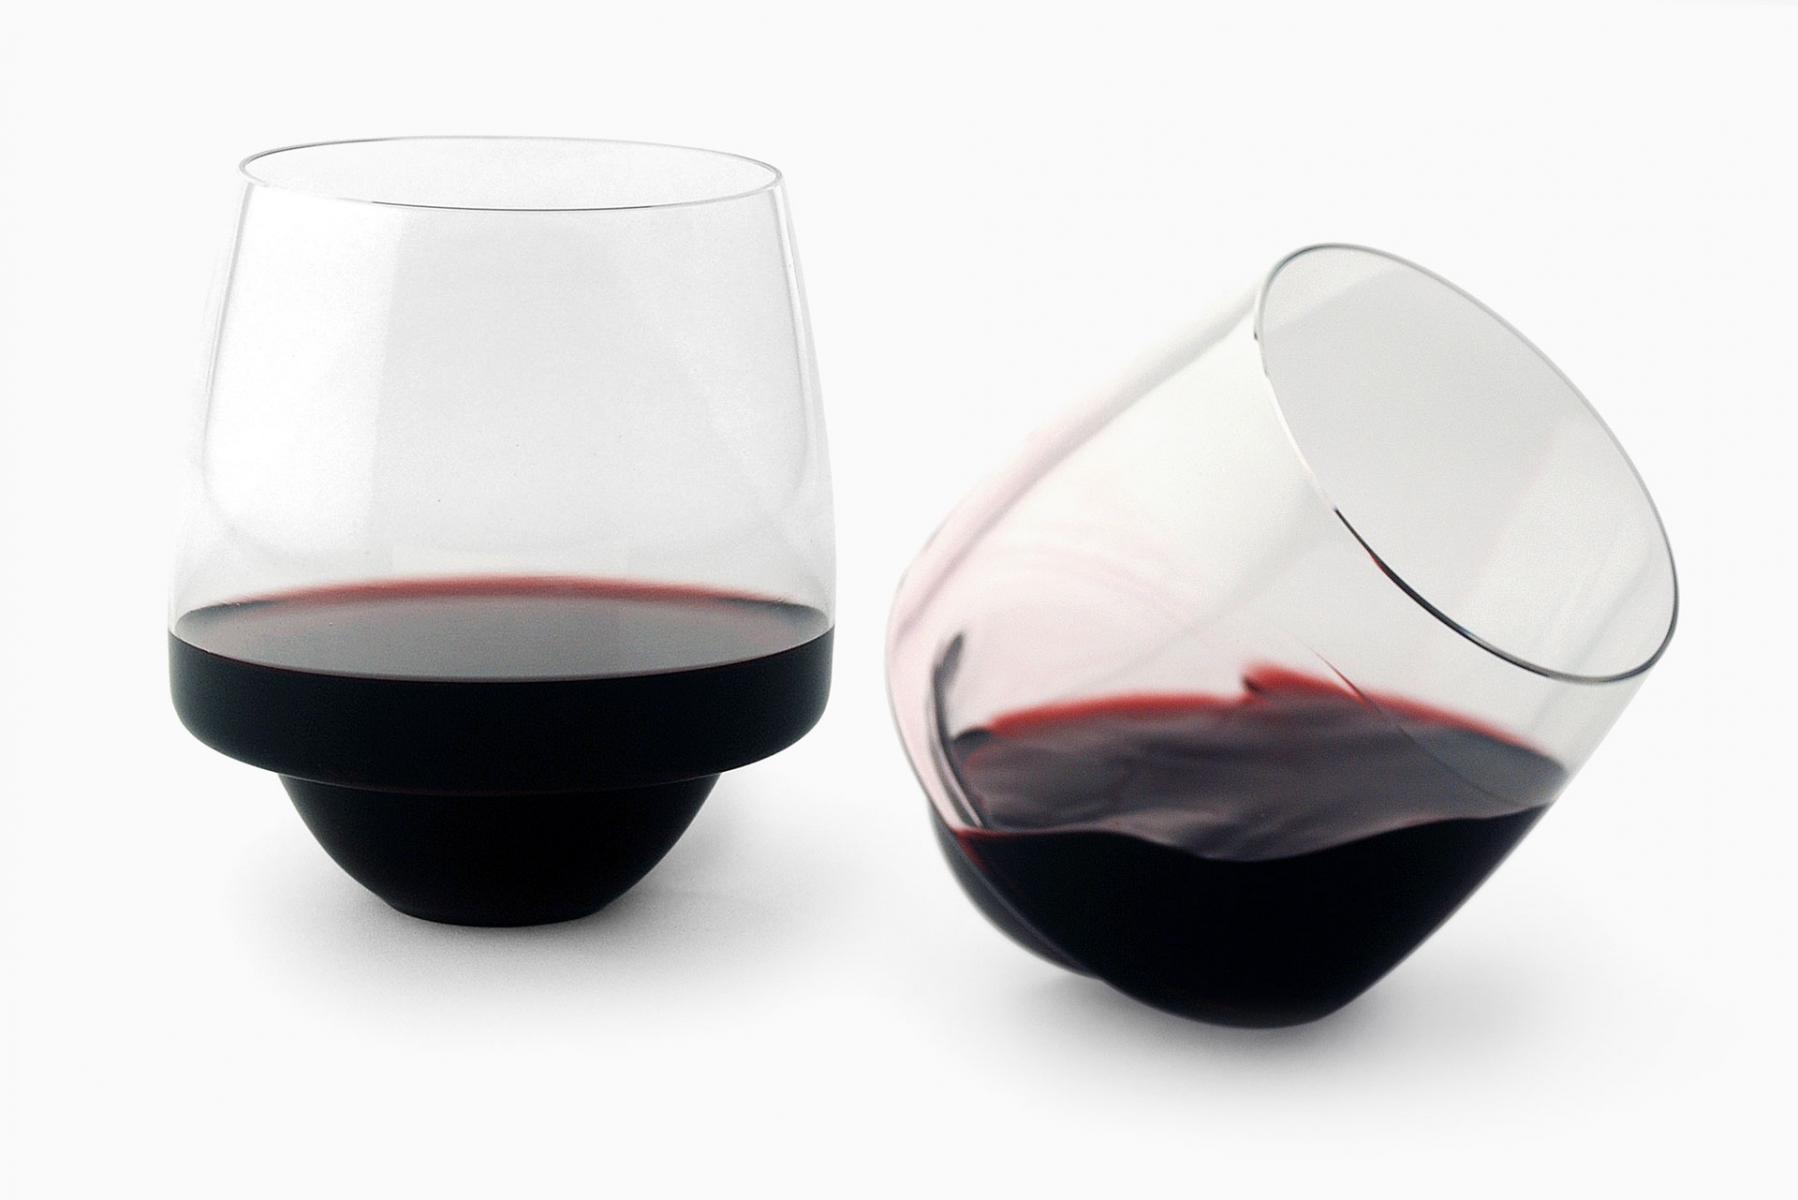 10 Holiday Gift Ideas For Your Favourite Drinker